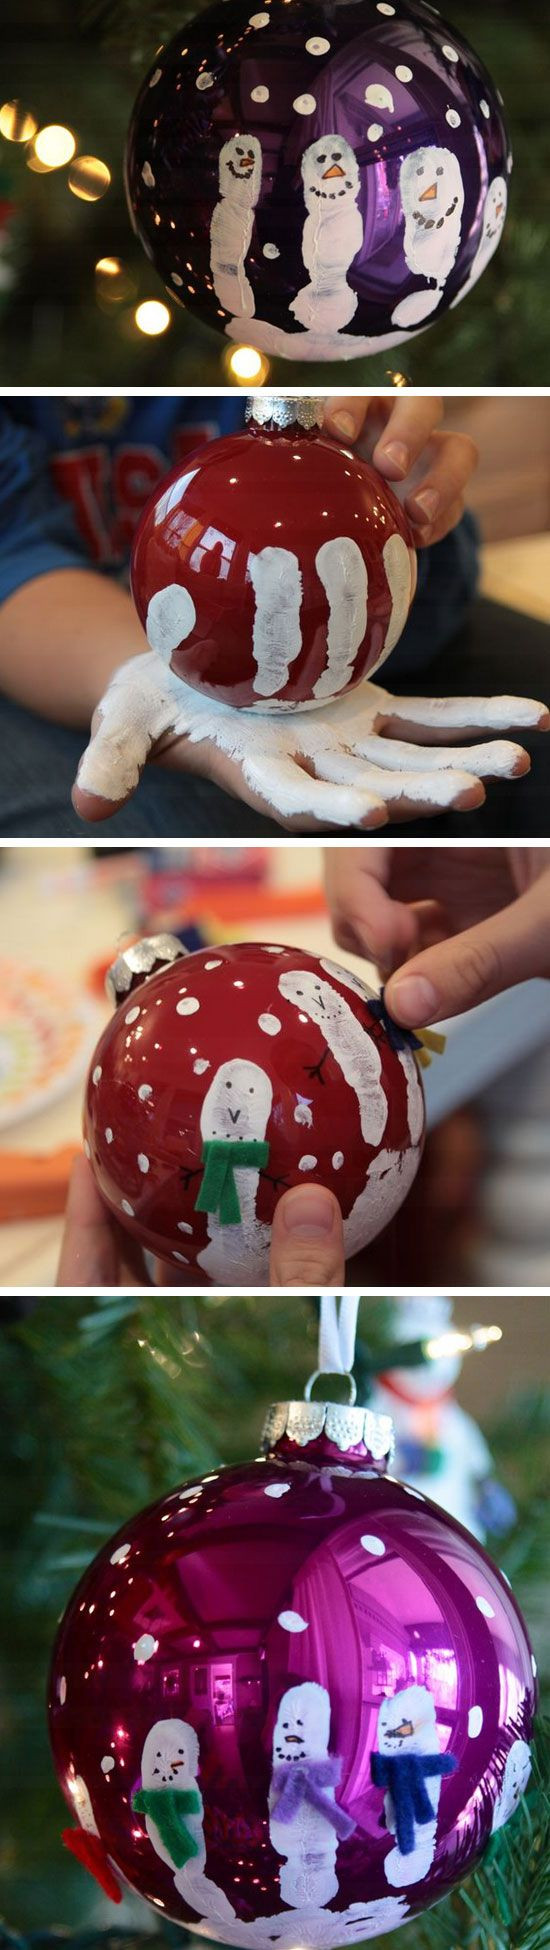 DIY Projects For Toddlers
 Easy and Cute DIY Christmas Crafts for Kids to Make Hative